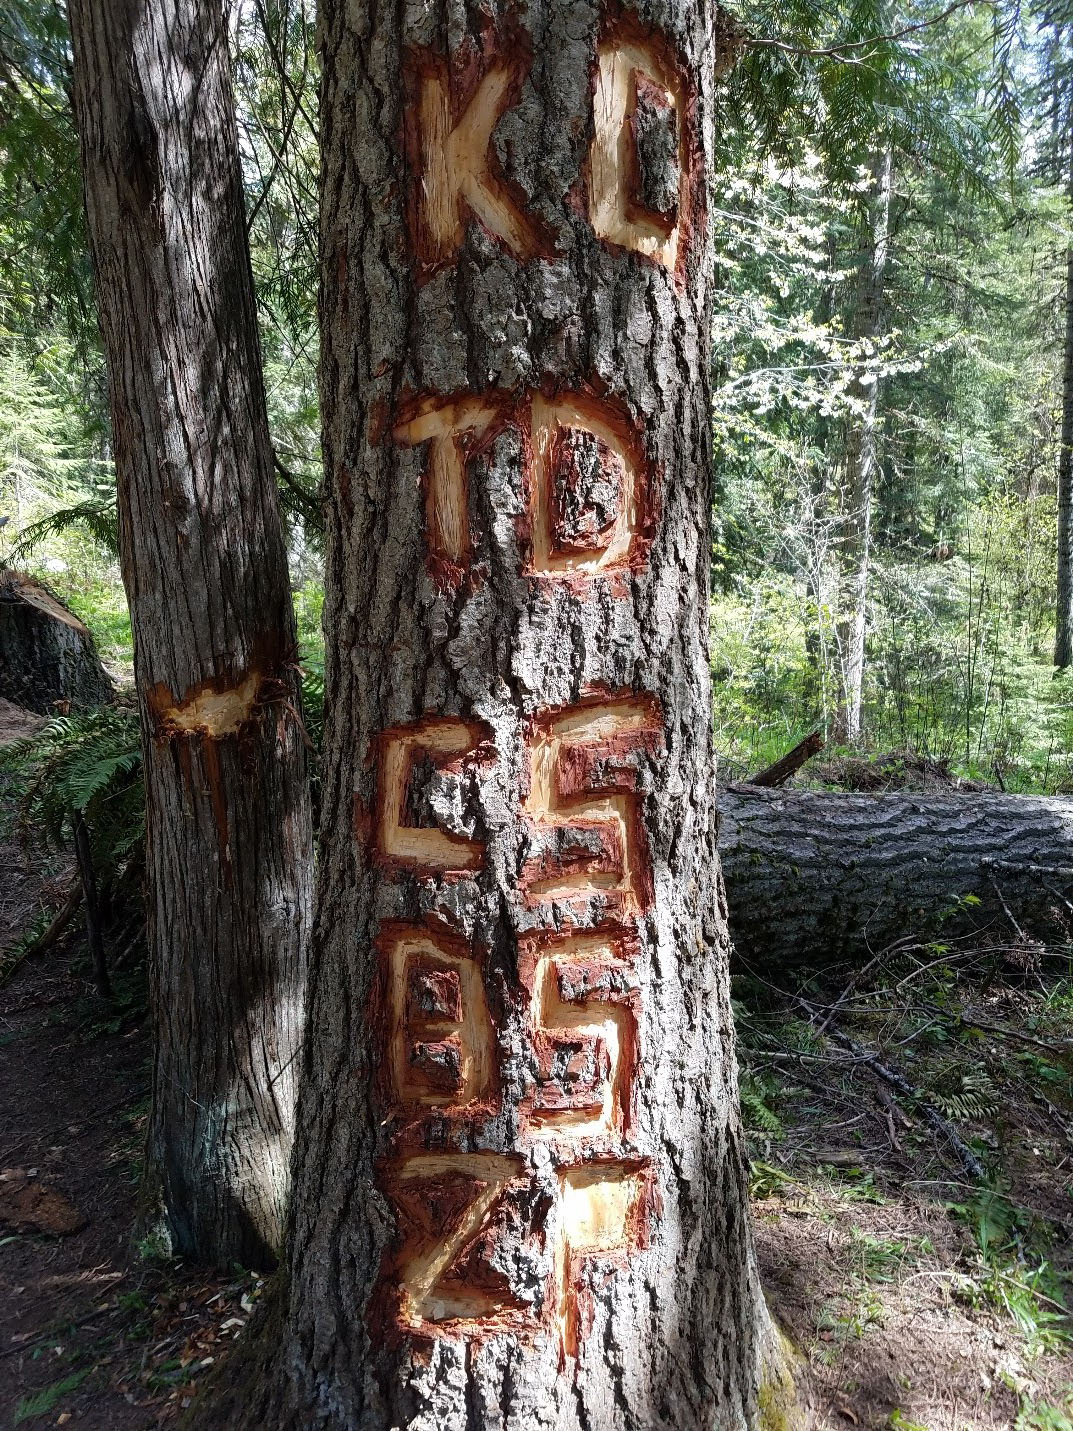 Ten large letters carved in the bark of a tree at Rackliff Campground.